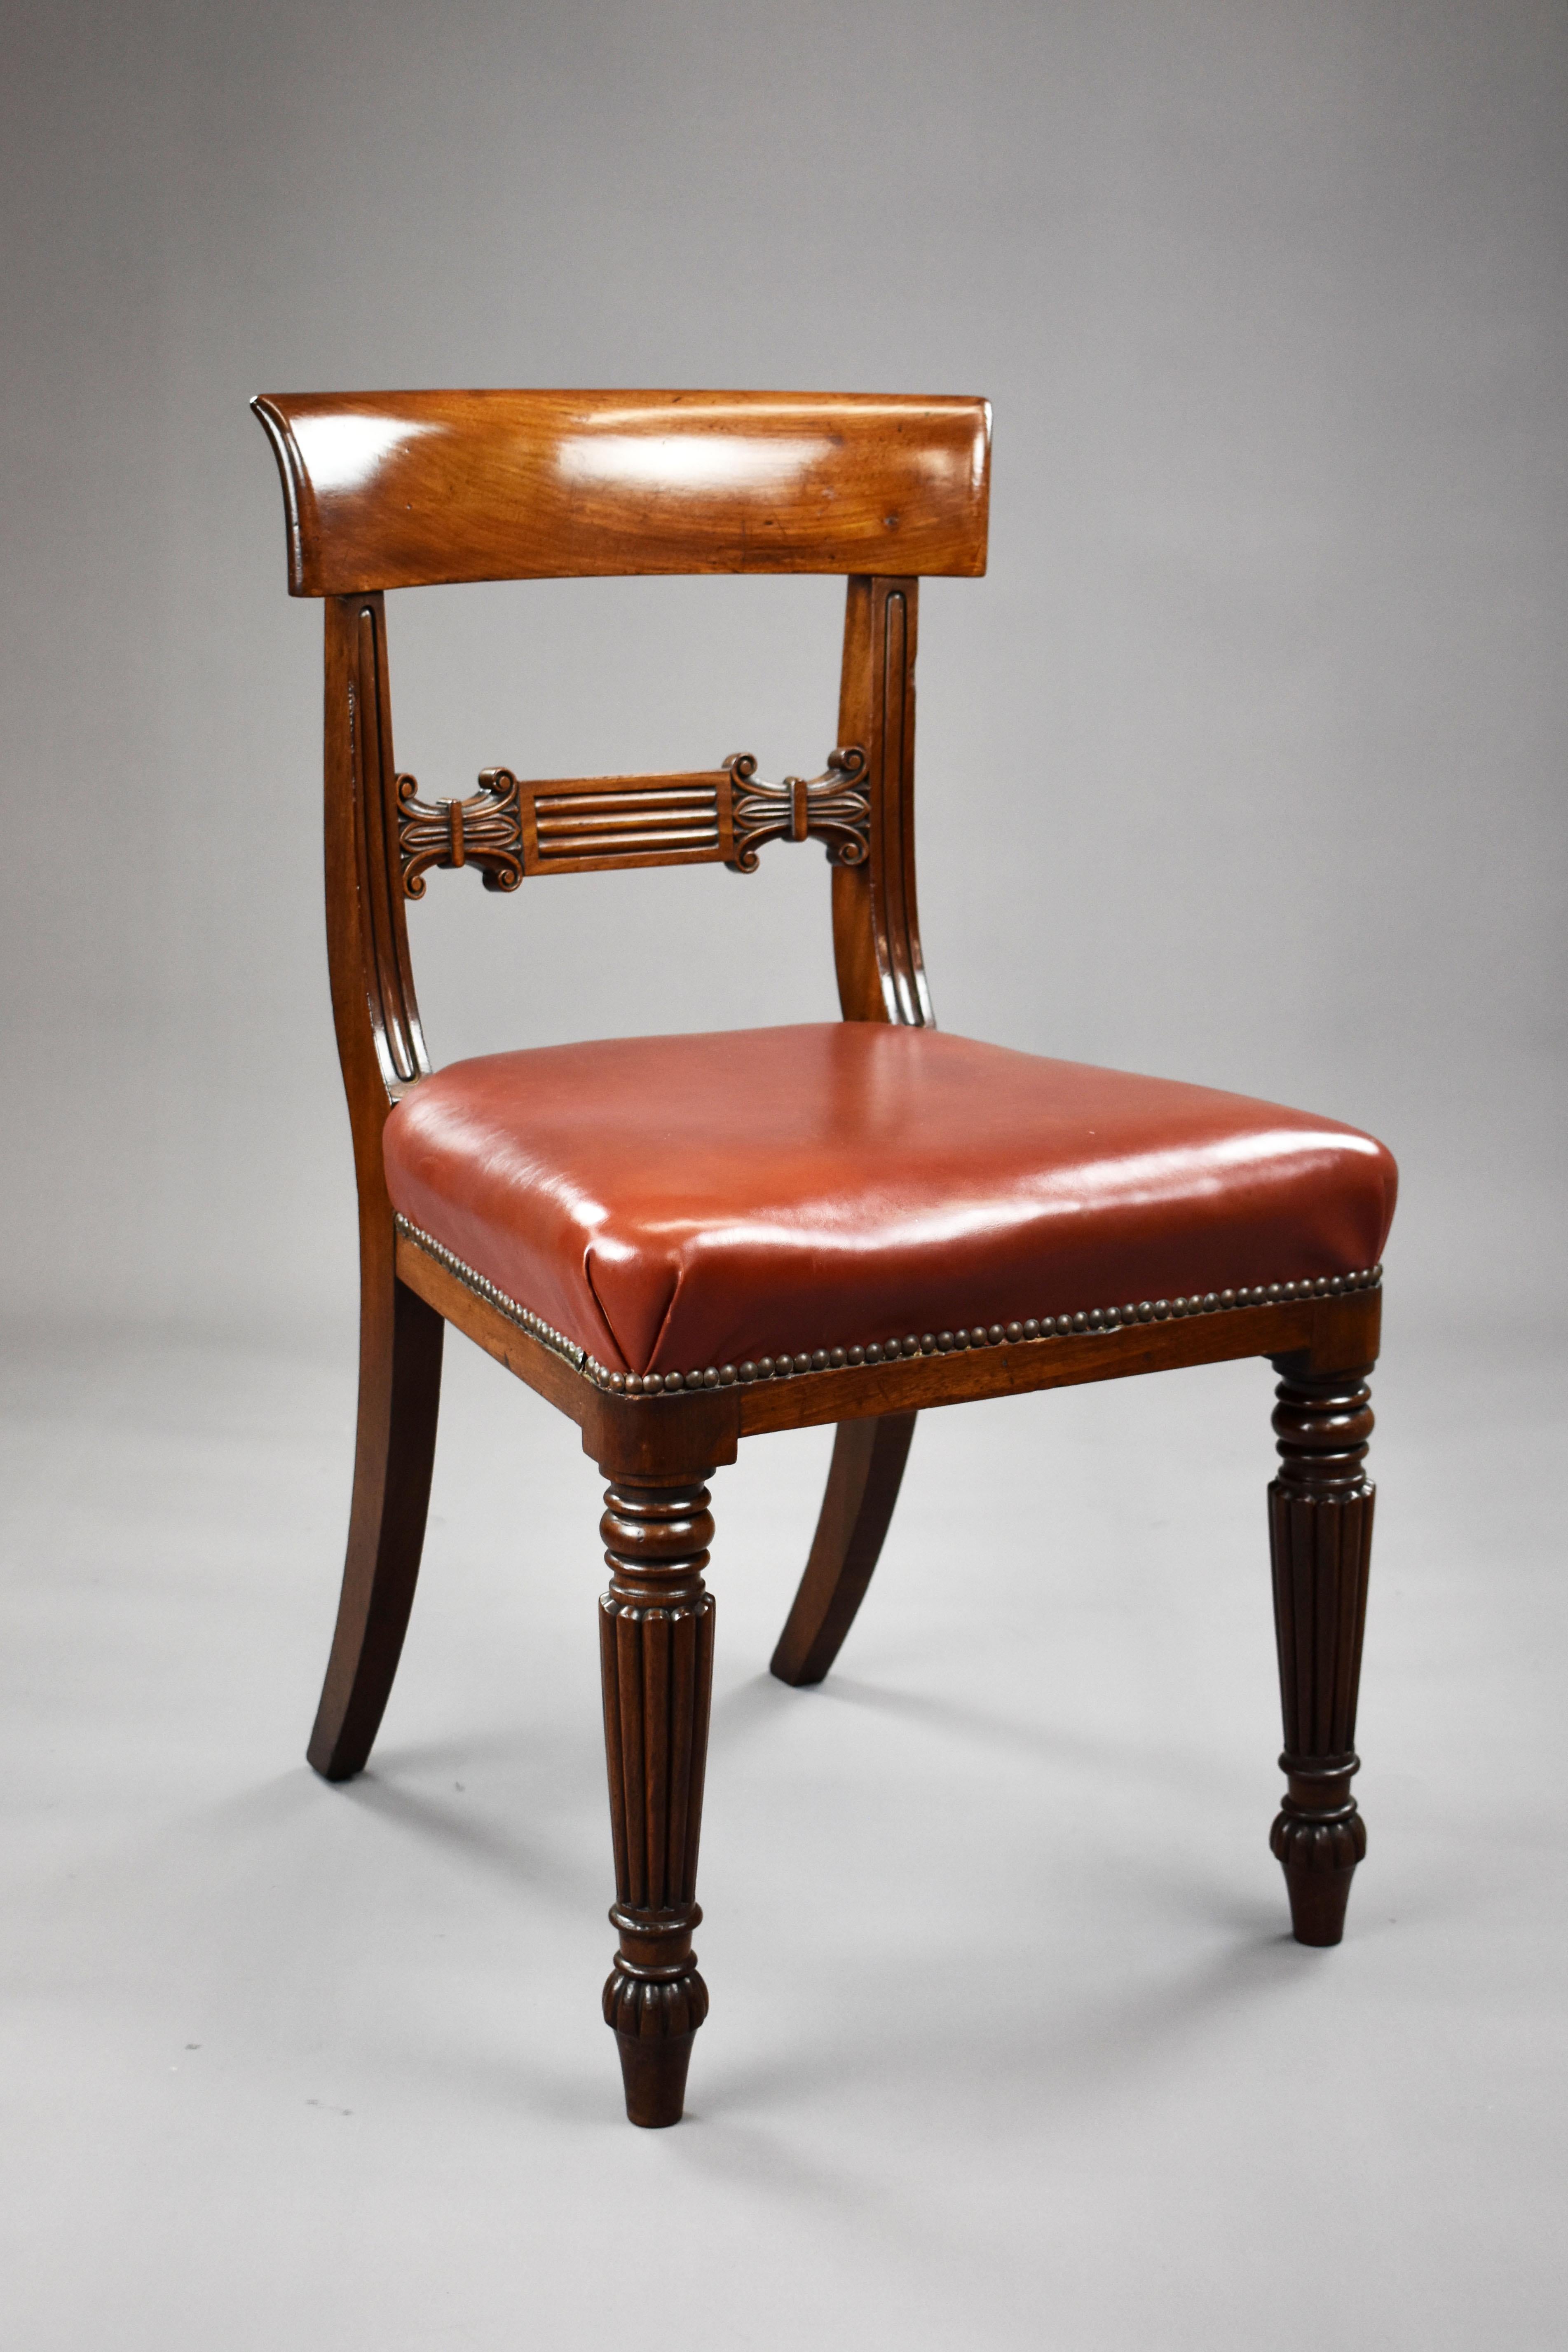 A good quality set of 4 George III mahogany dining chairs, having bar backs over red faux leather seats, standing on turned and reeded legs. All of the chairs are structurally sound and all remain in very good condition for their age.